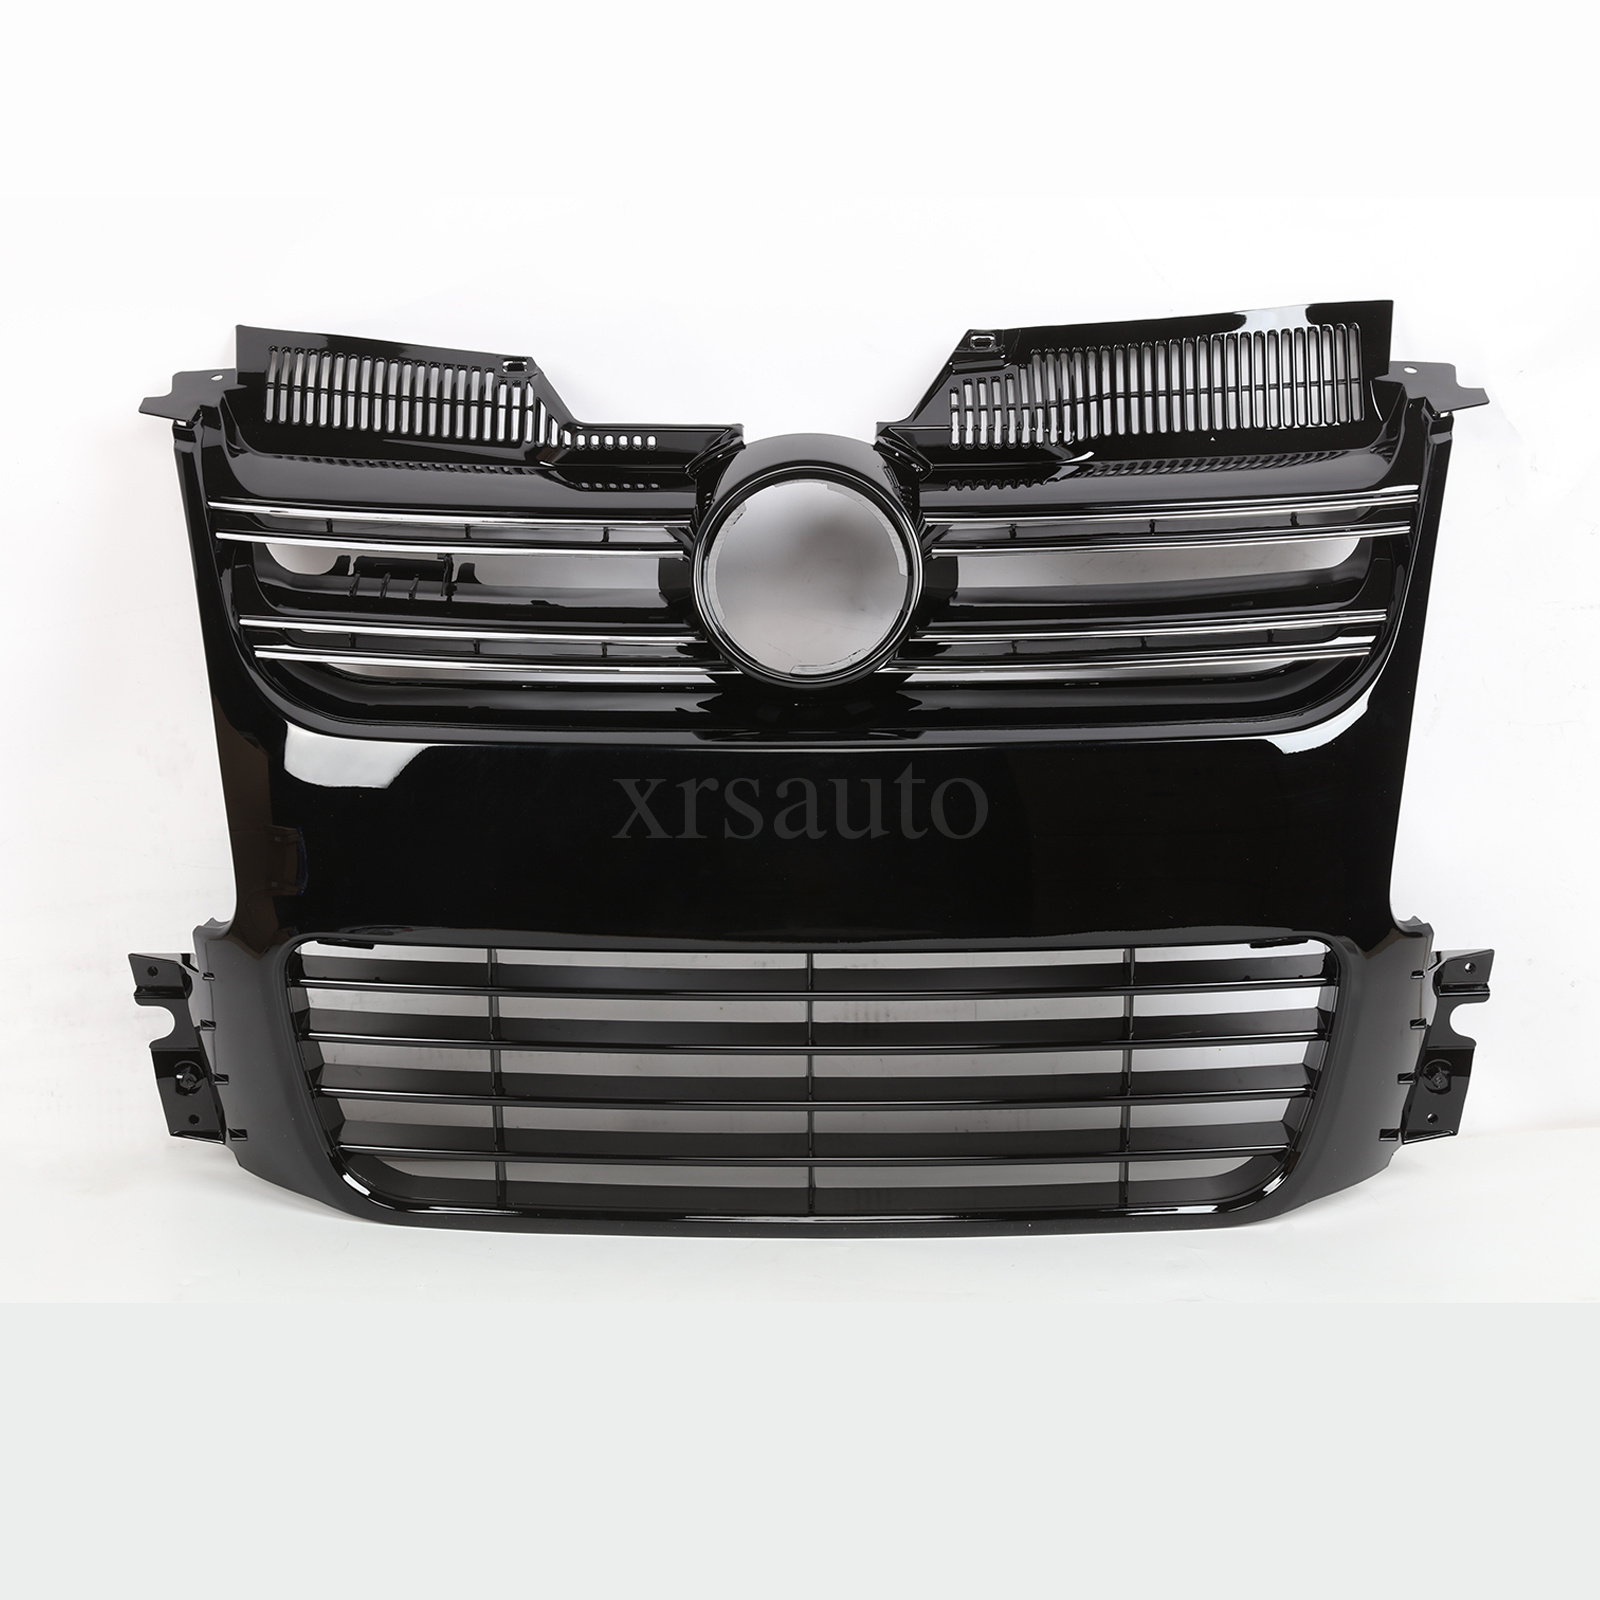 2003-2008 VW Style Grille R Volkswagen W/ Golf Bumper Front For MK5 5 Cover | eBay